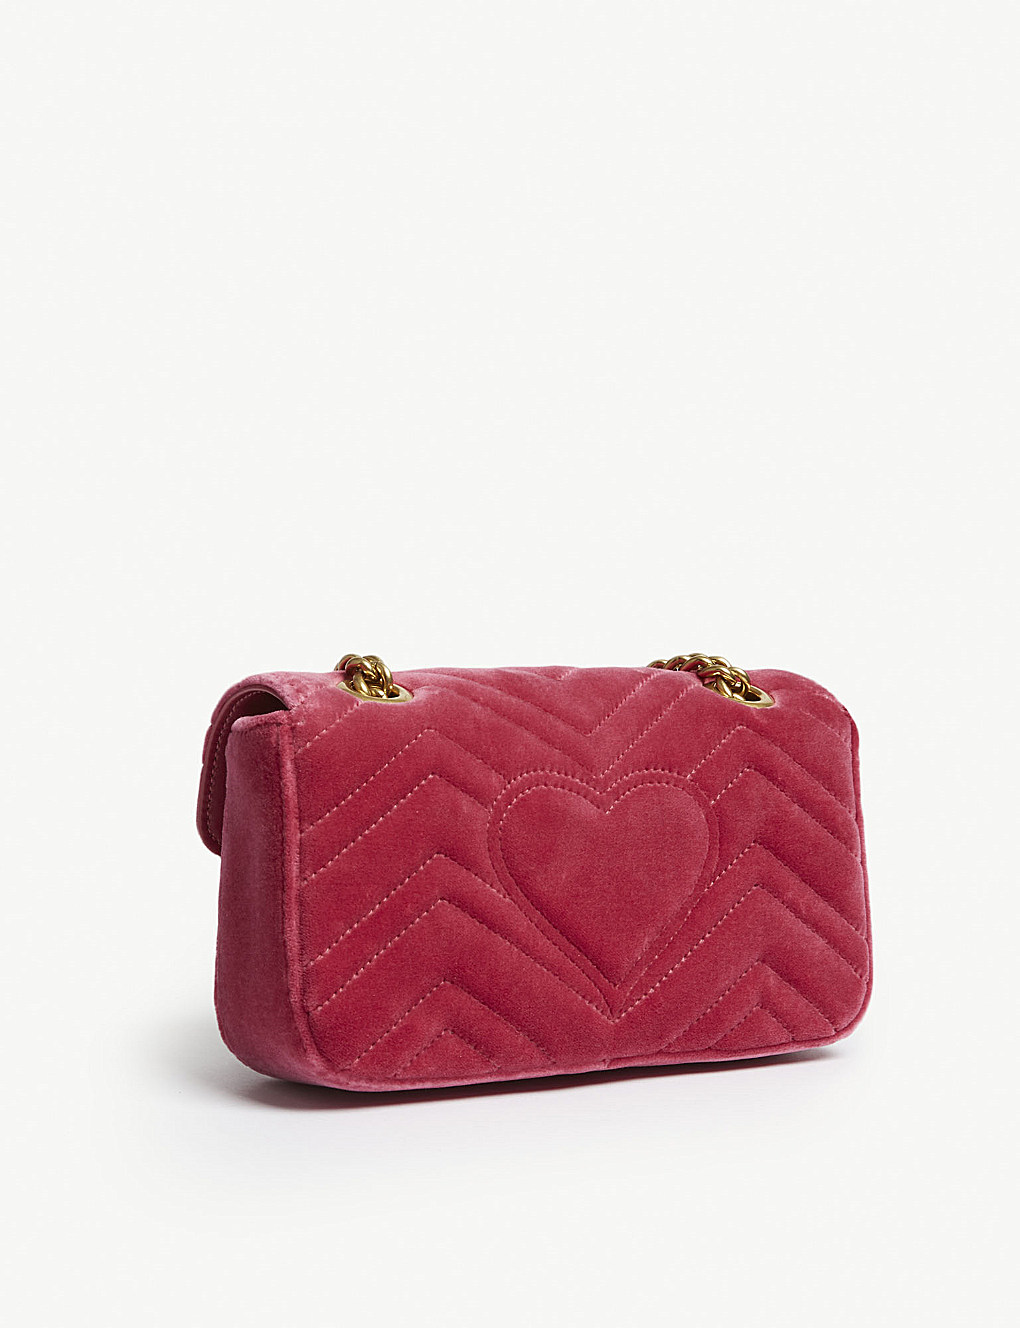 gucci red heart bag